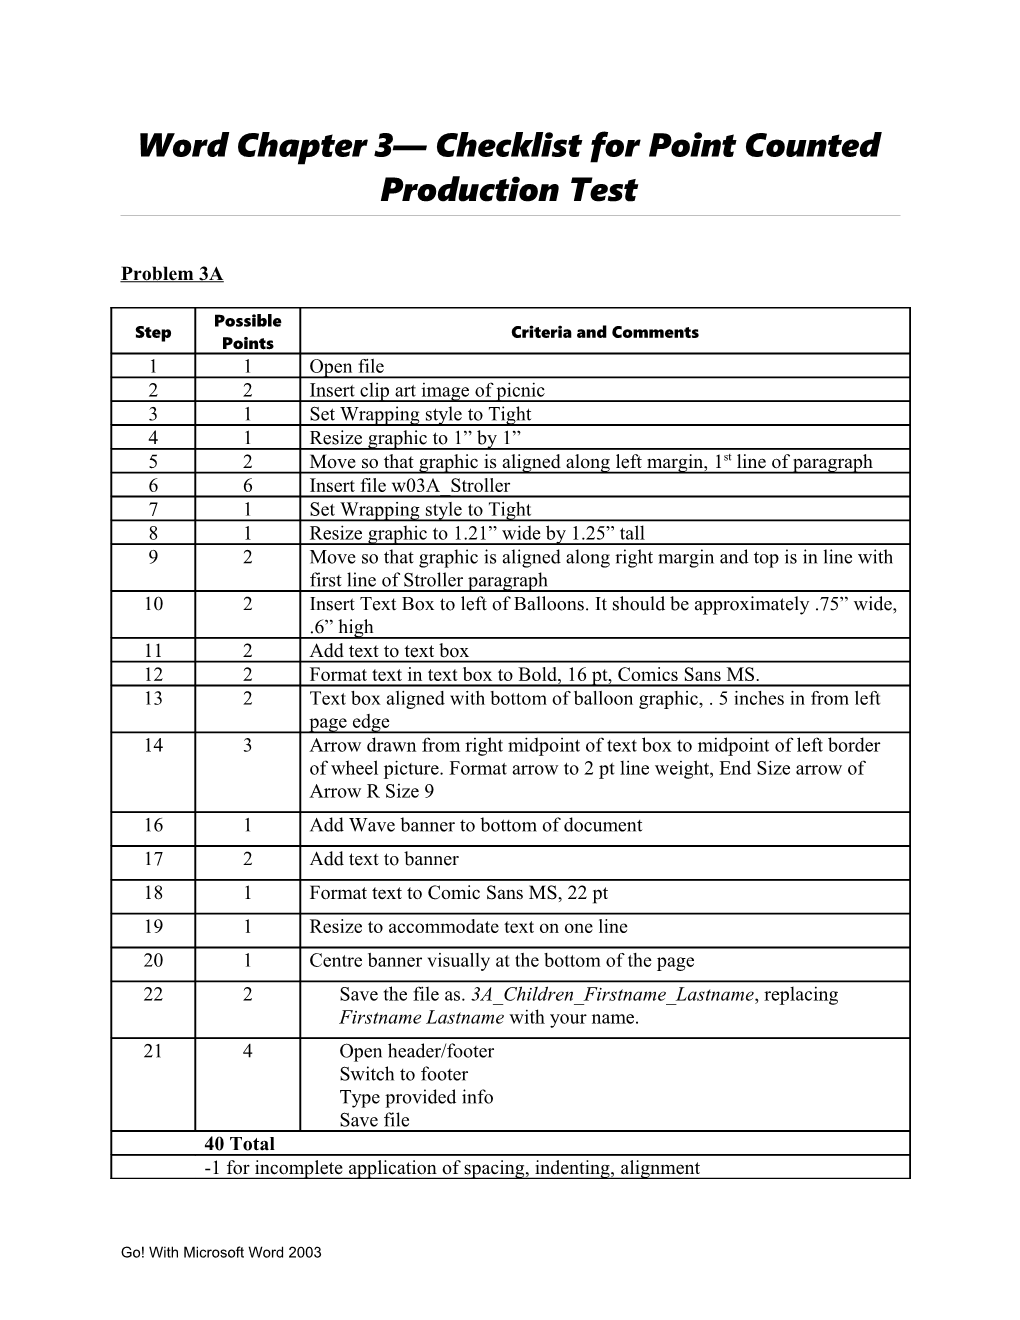 Word Chapter 2 Checklist for Performance Test